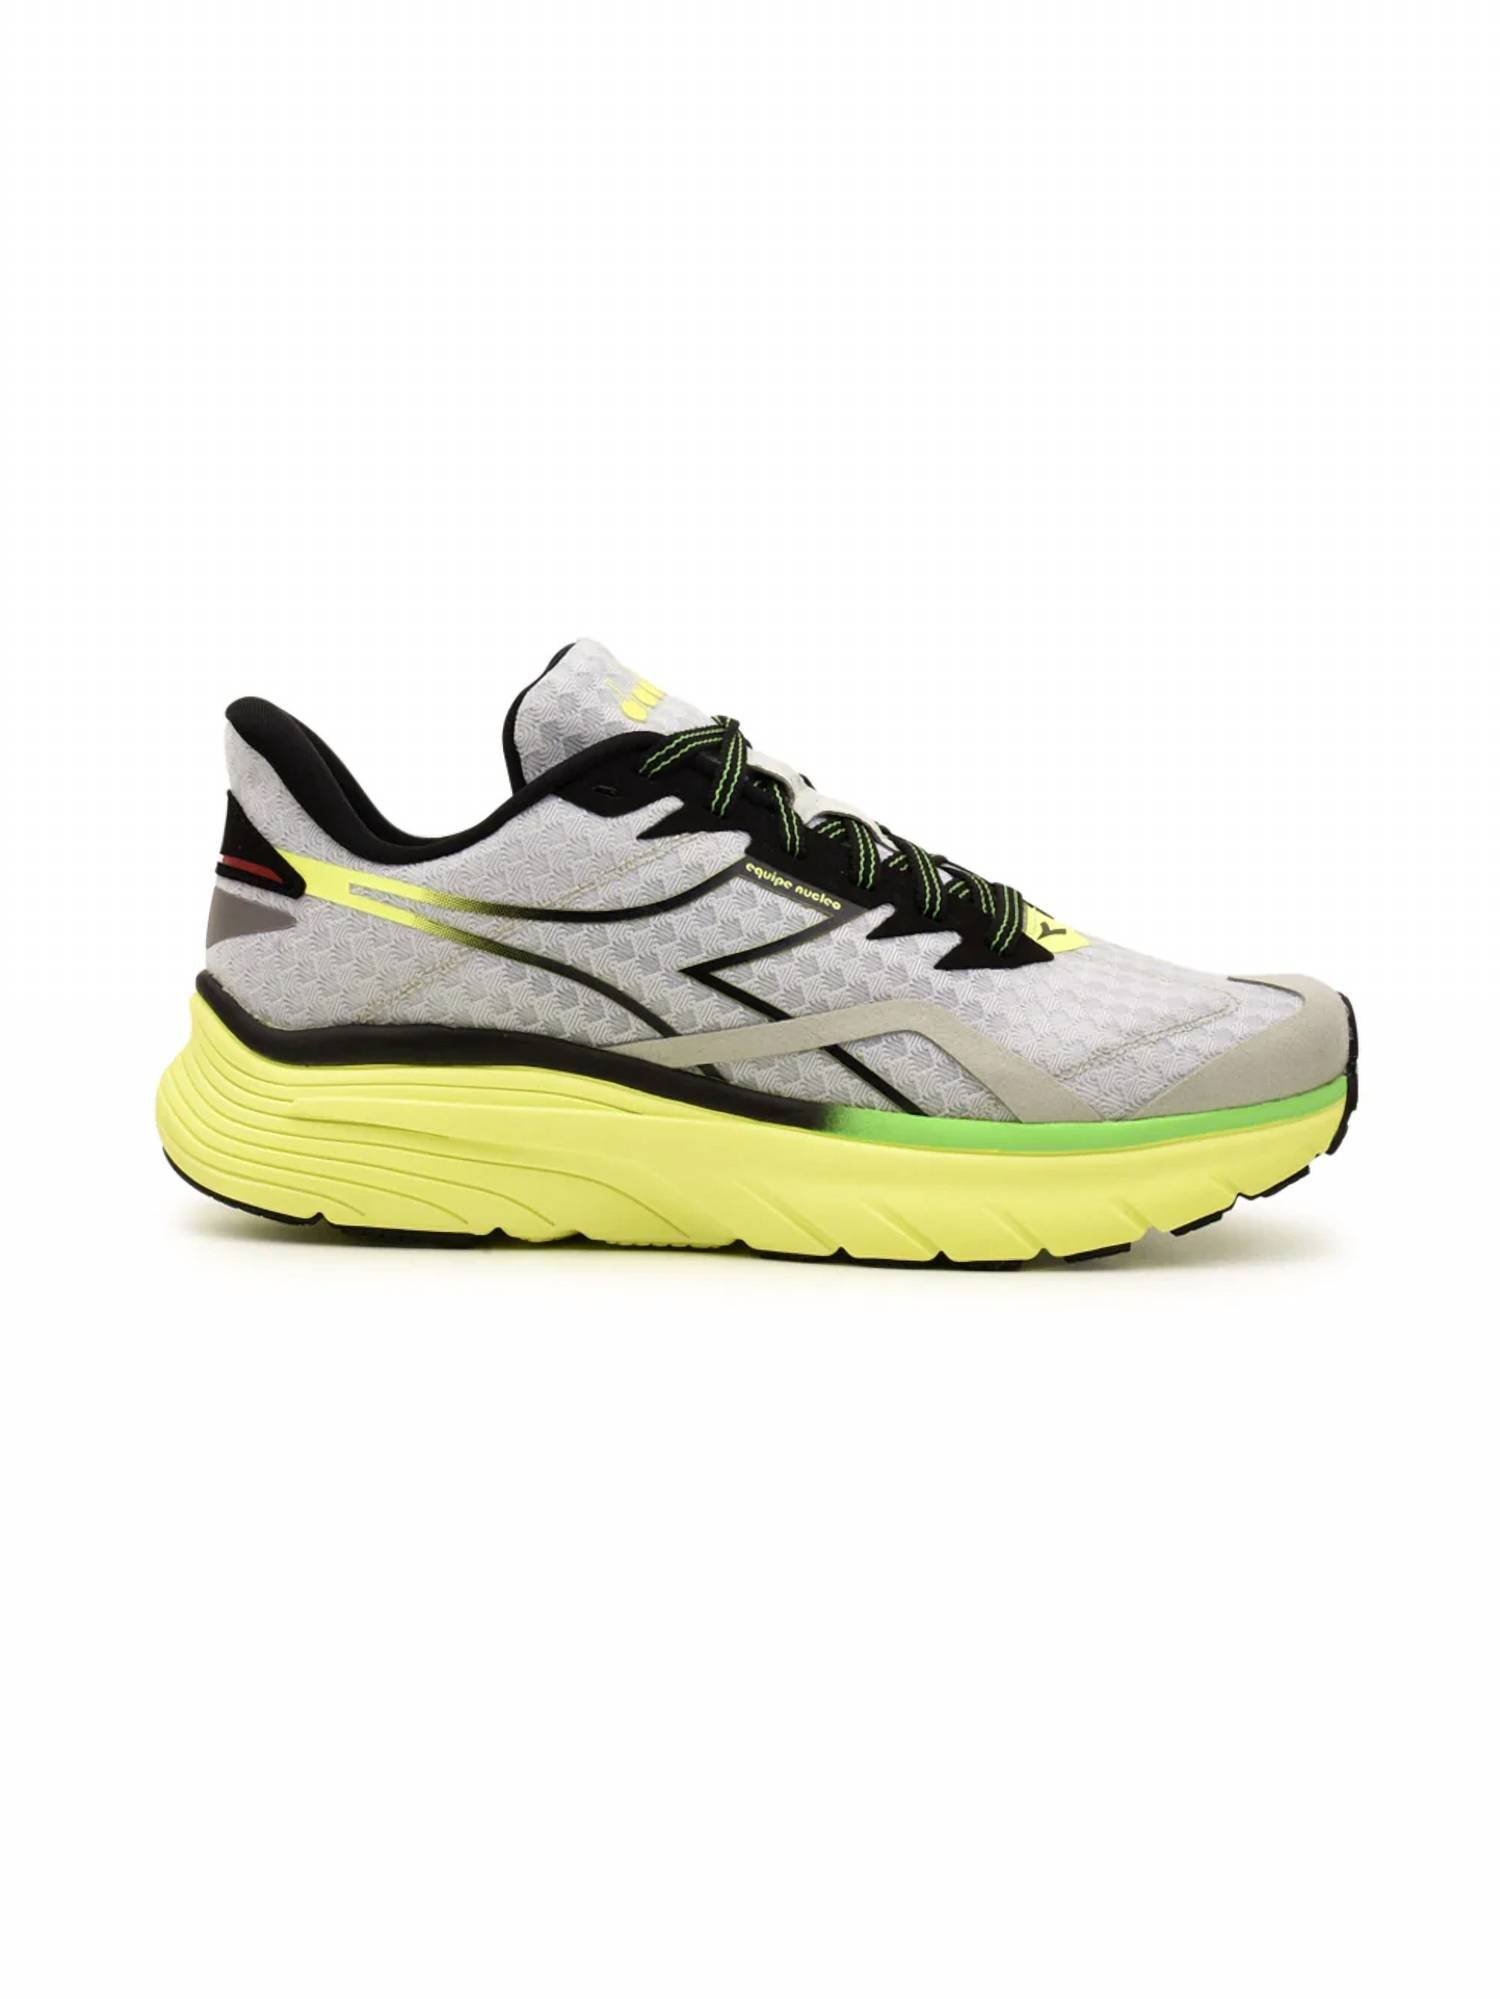 Diadora Men's Equipe Nucleo Shoes In Silver/yellow In Multi